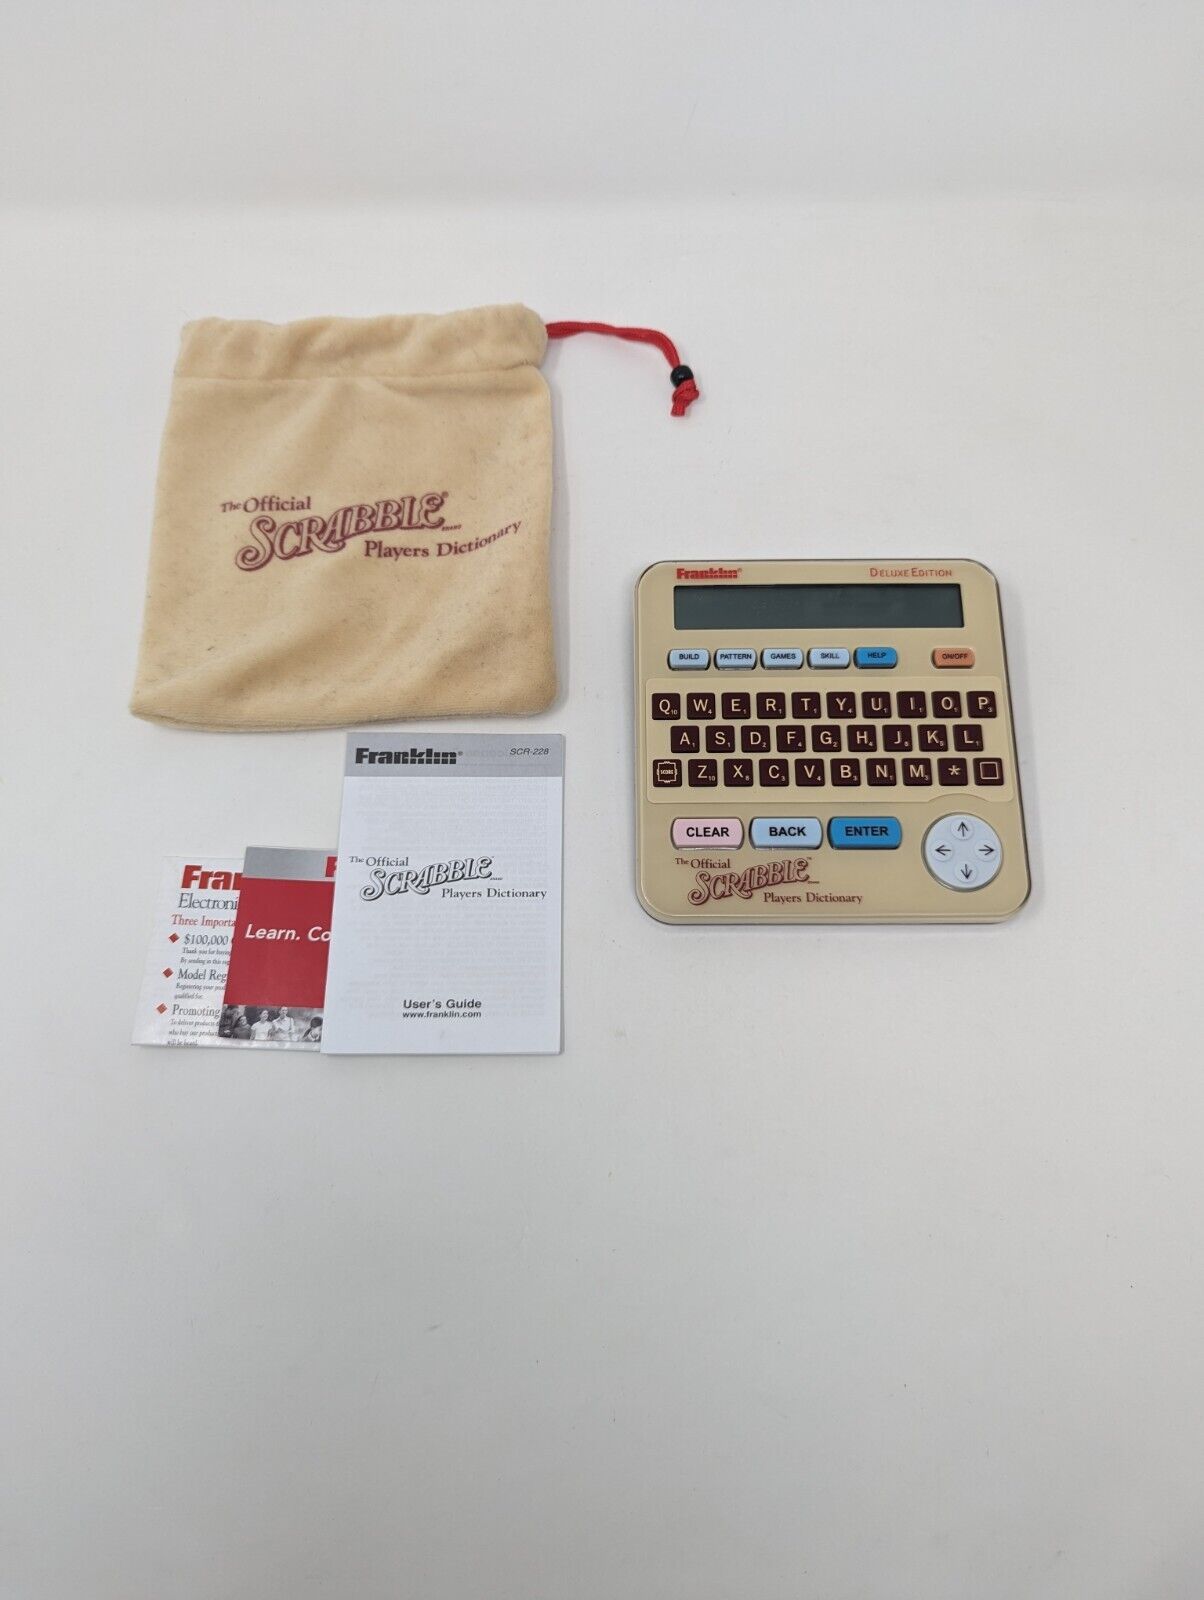 Franklin Scrabble Players Electronic Dictionary Deluxe Edition SCR-228